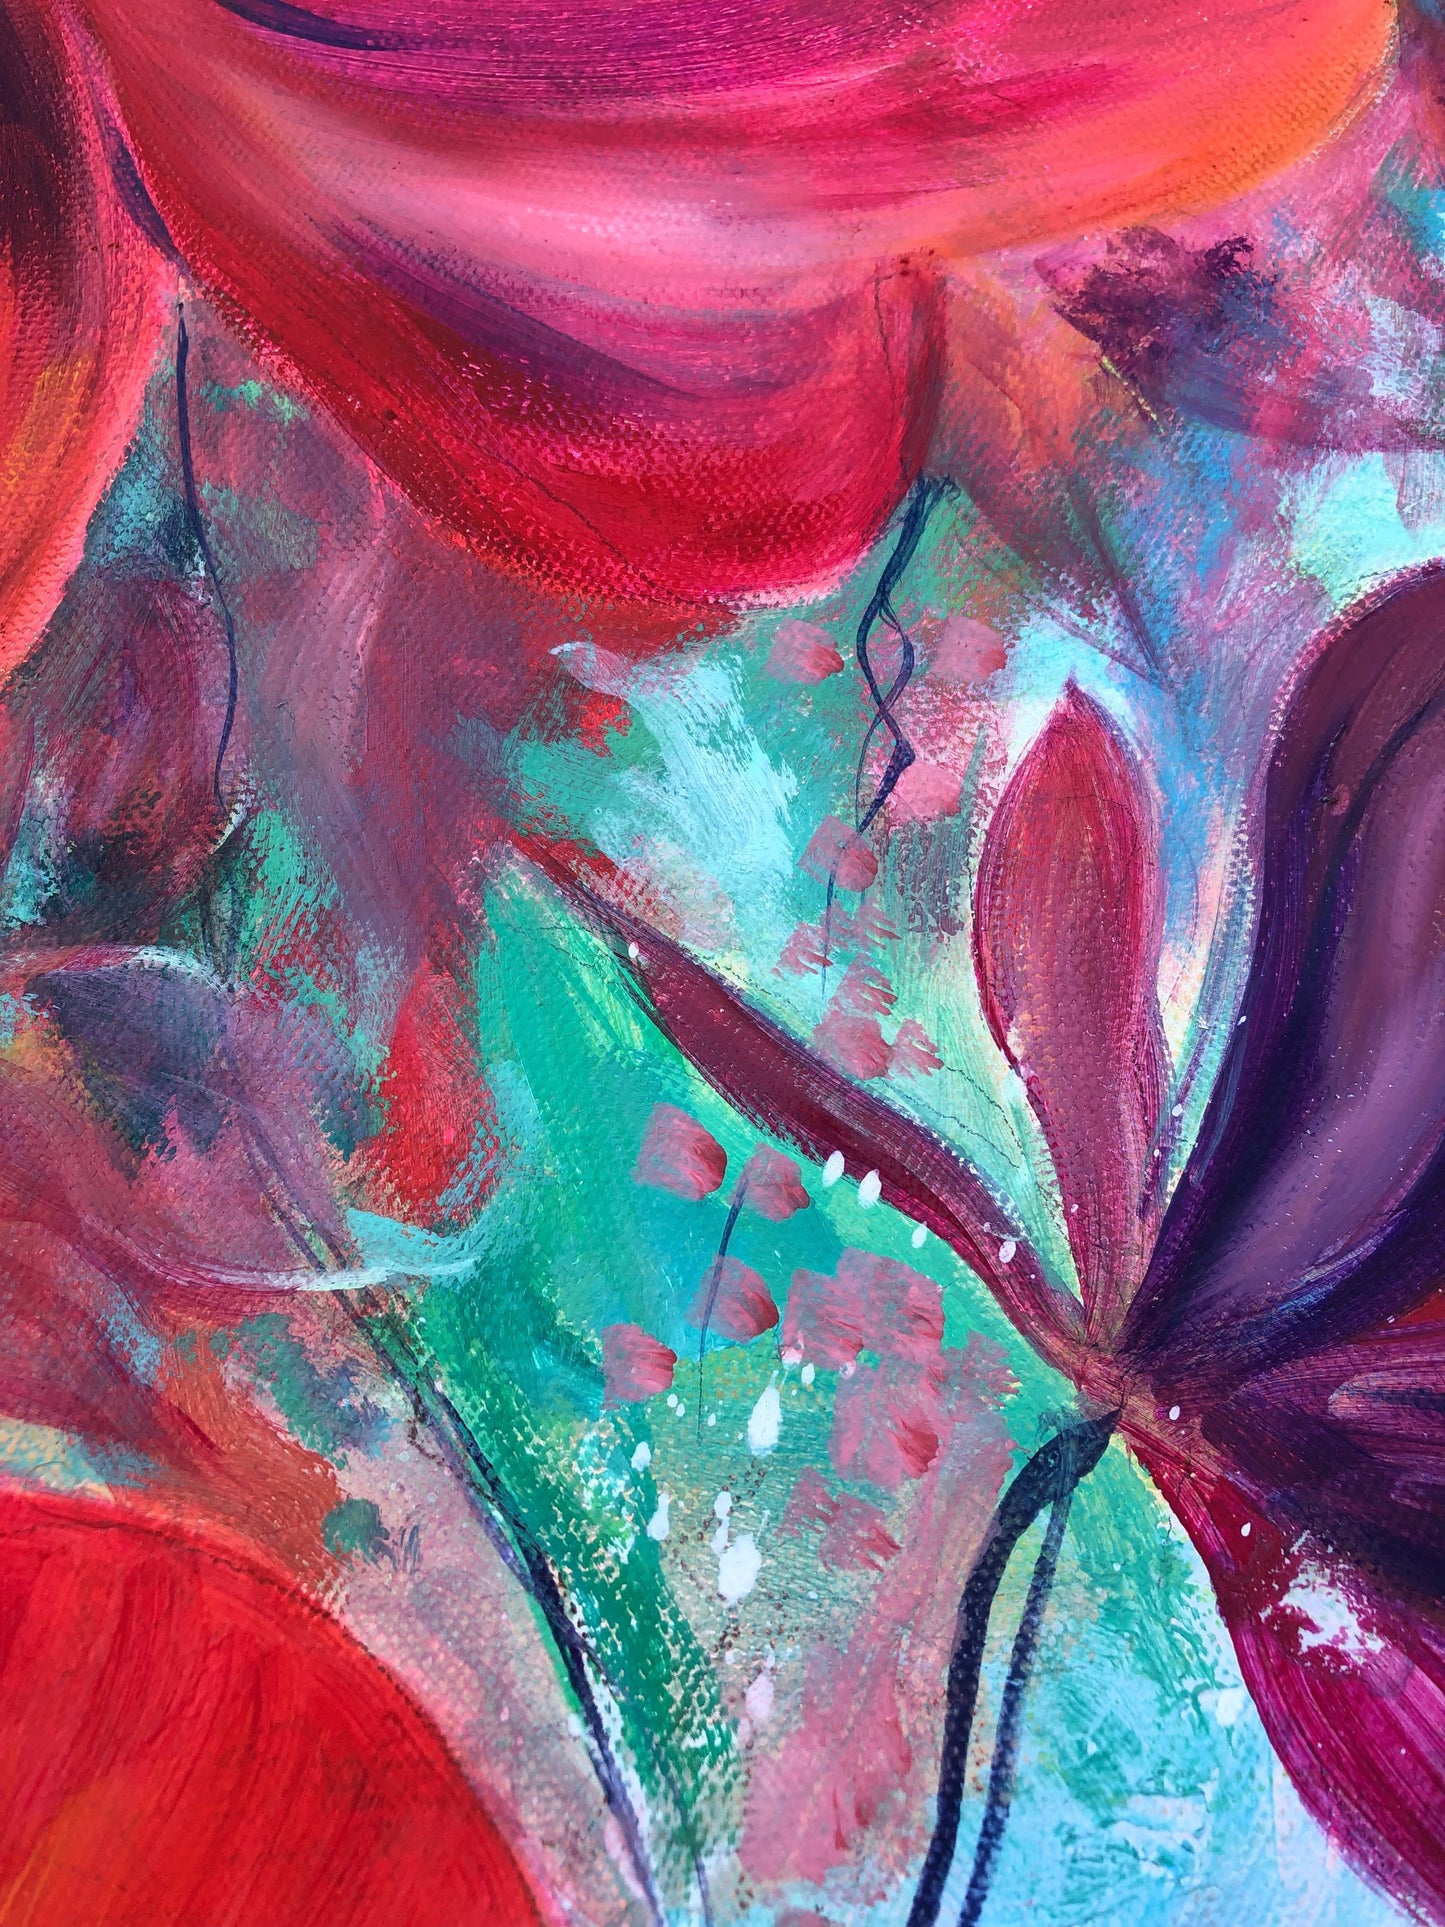 Close up detail of flowers and background textures on original painting called Joy.